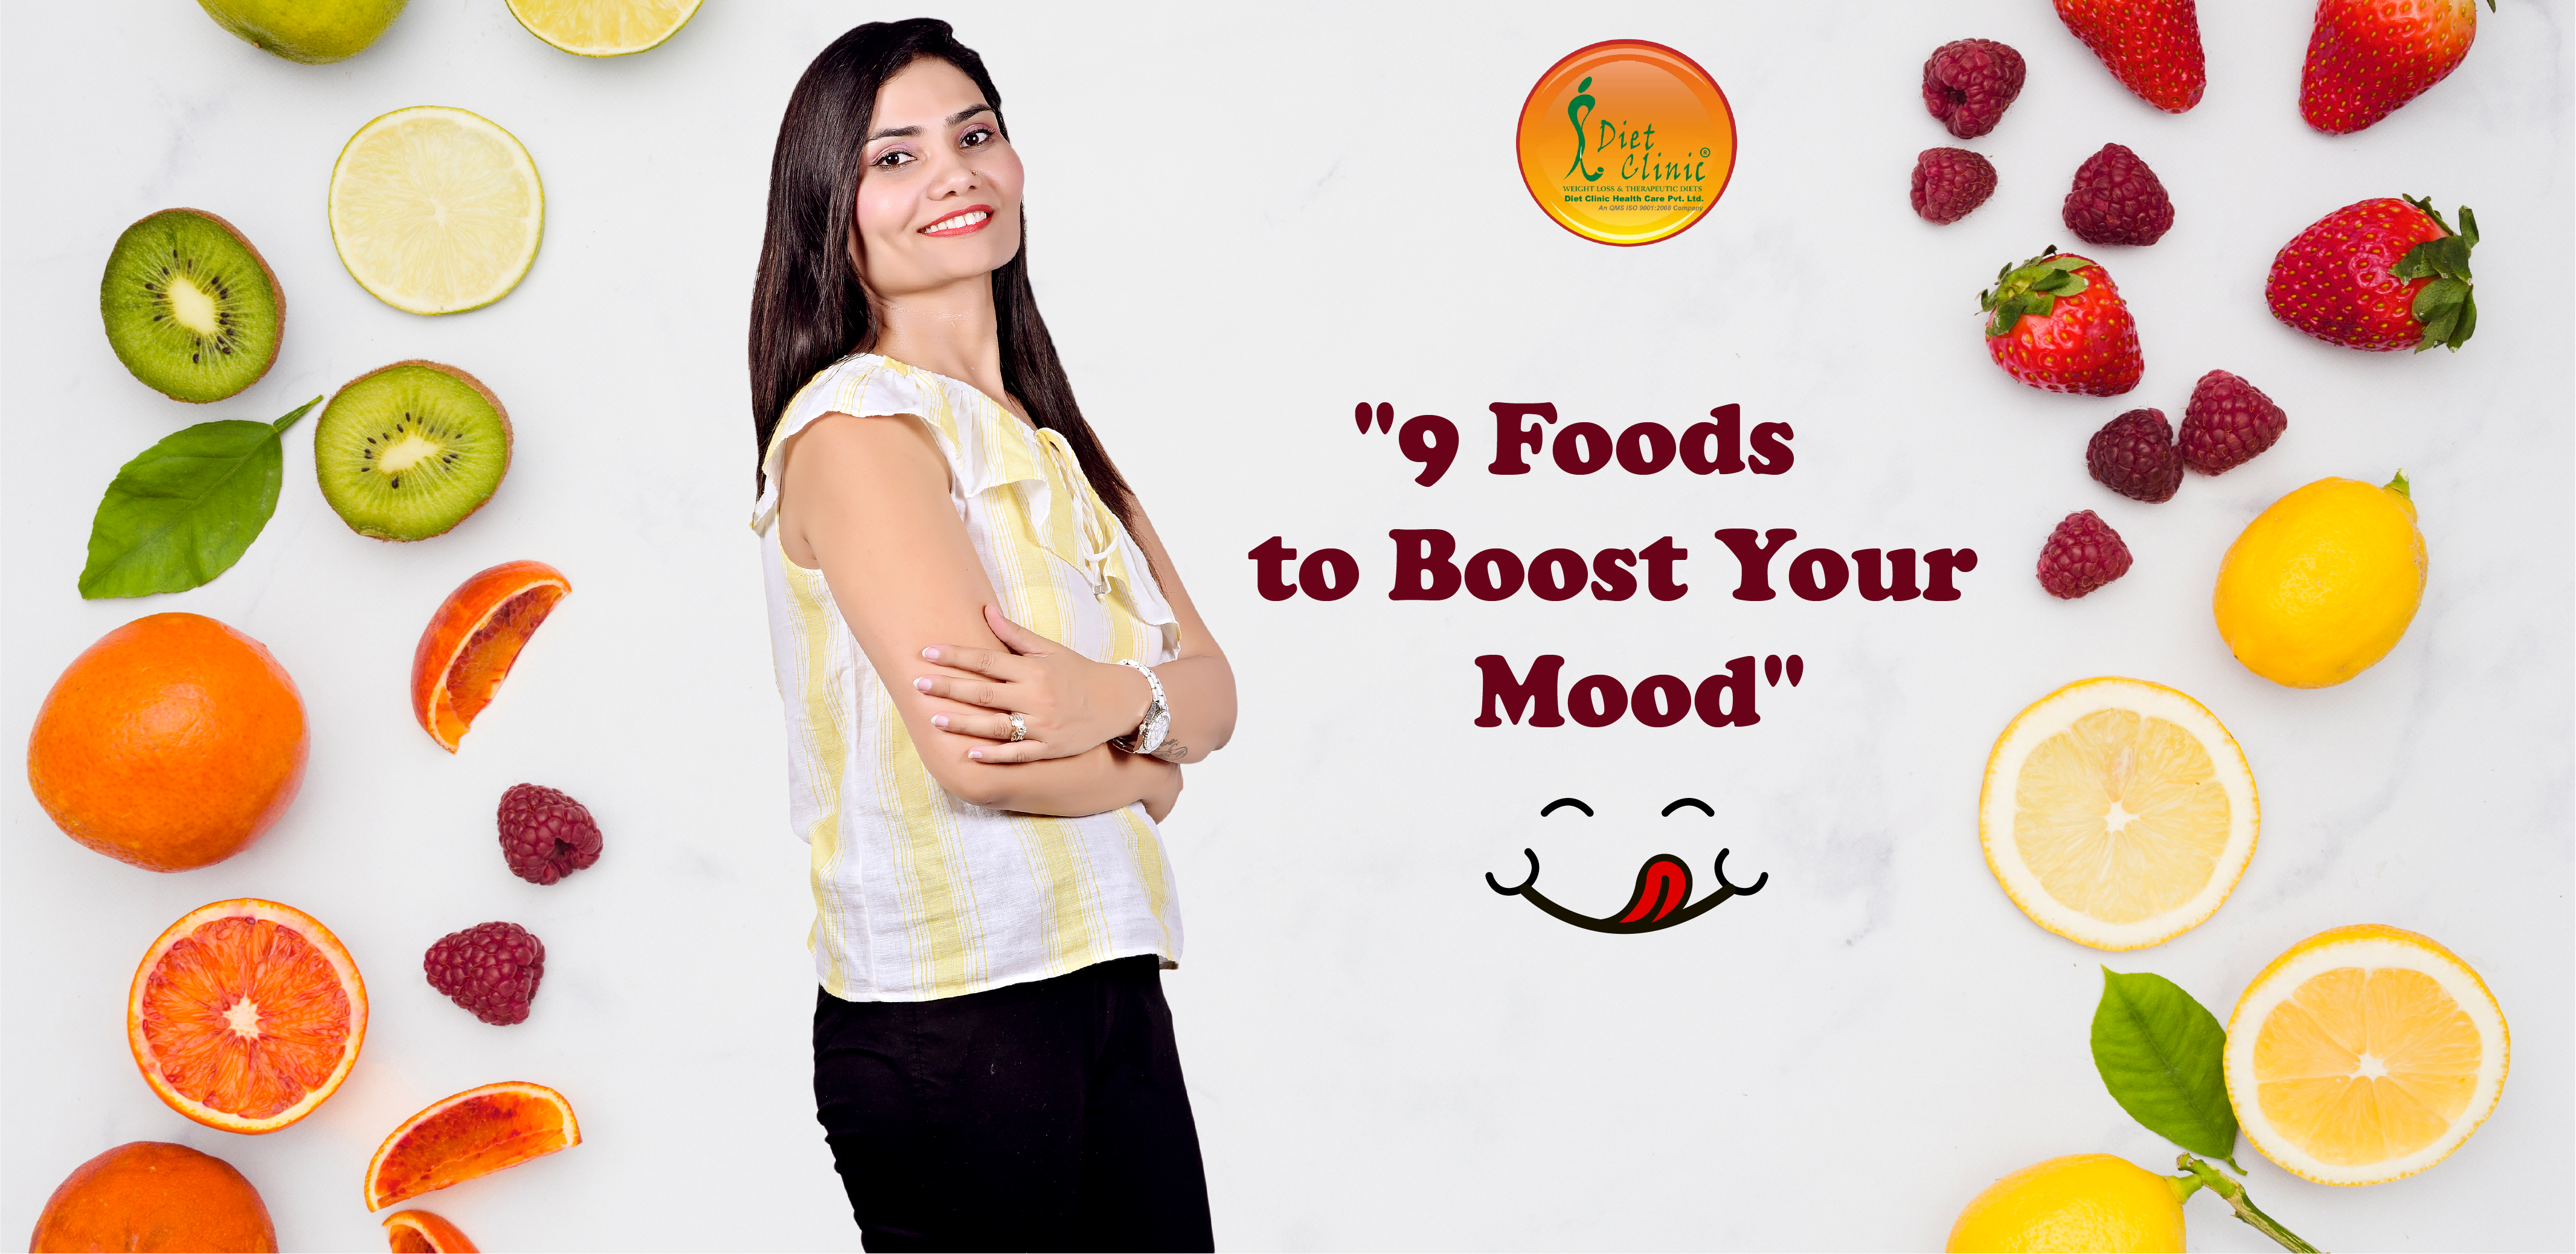 9 Foods to Boost Your Mood